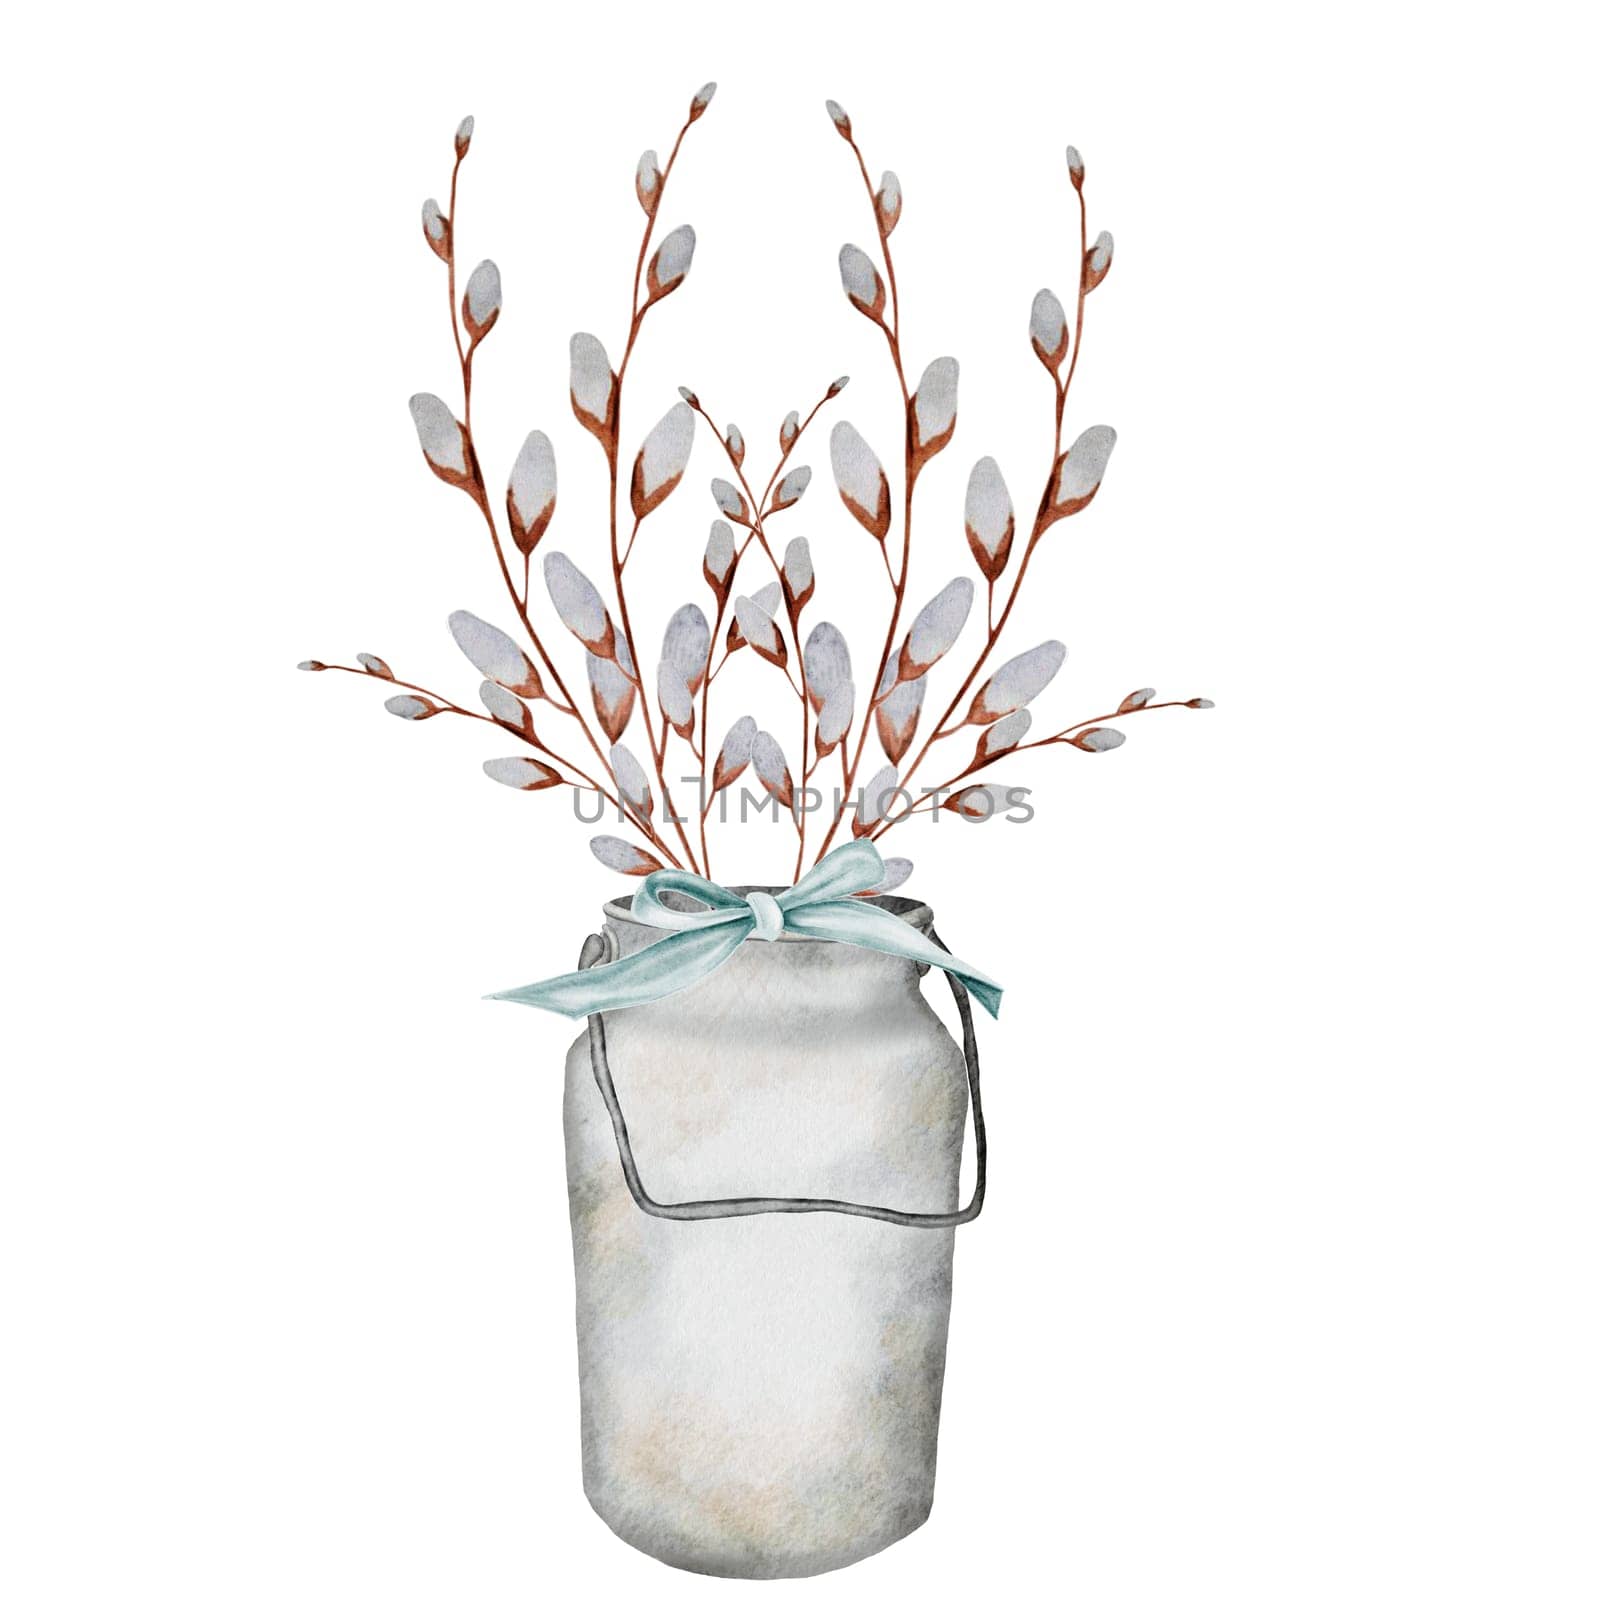 Willow watercolor hand drawing. A bouquet of branches with a blue bow in a metal milk can. Clip art of a festive composition isolated on a white background. Ideal for invitations and cards for Easter, Thanksgiving by TatyanaTrushcheleva